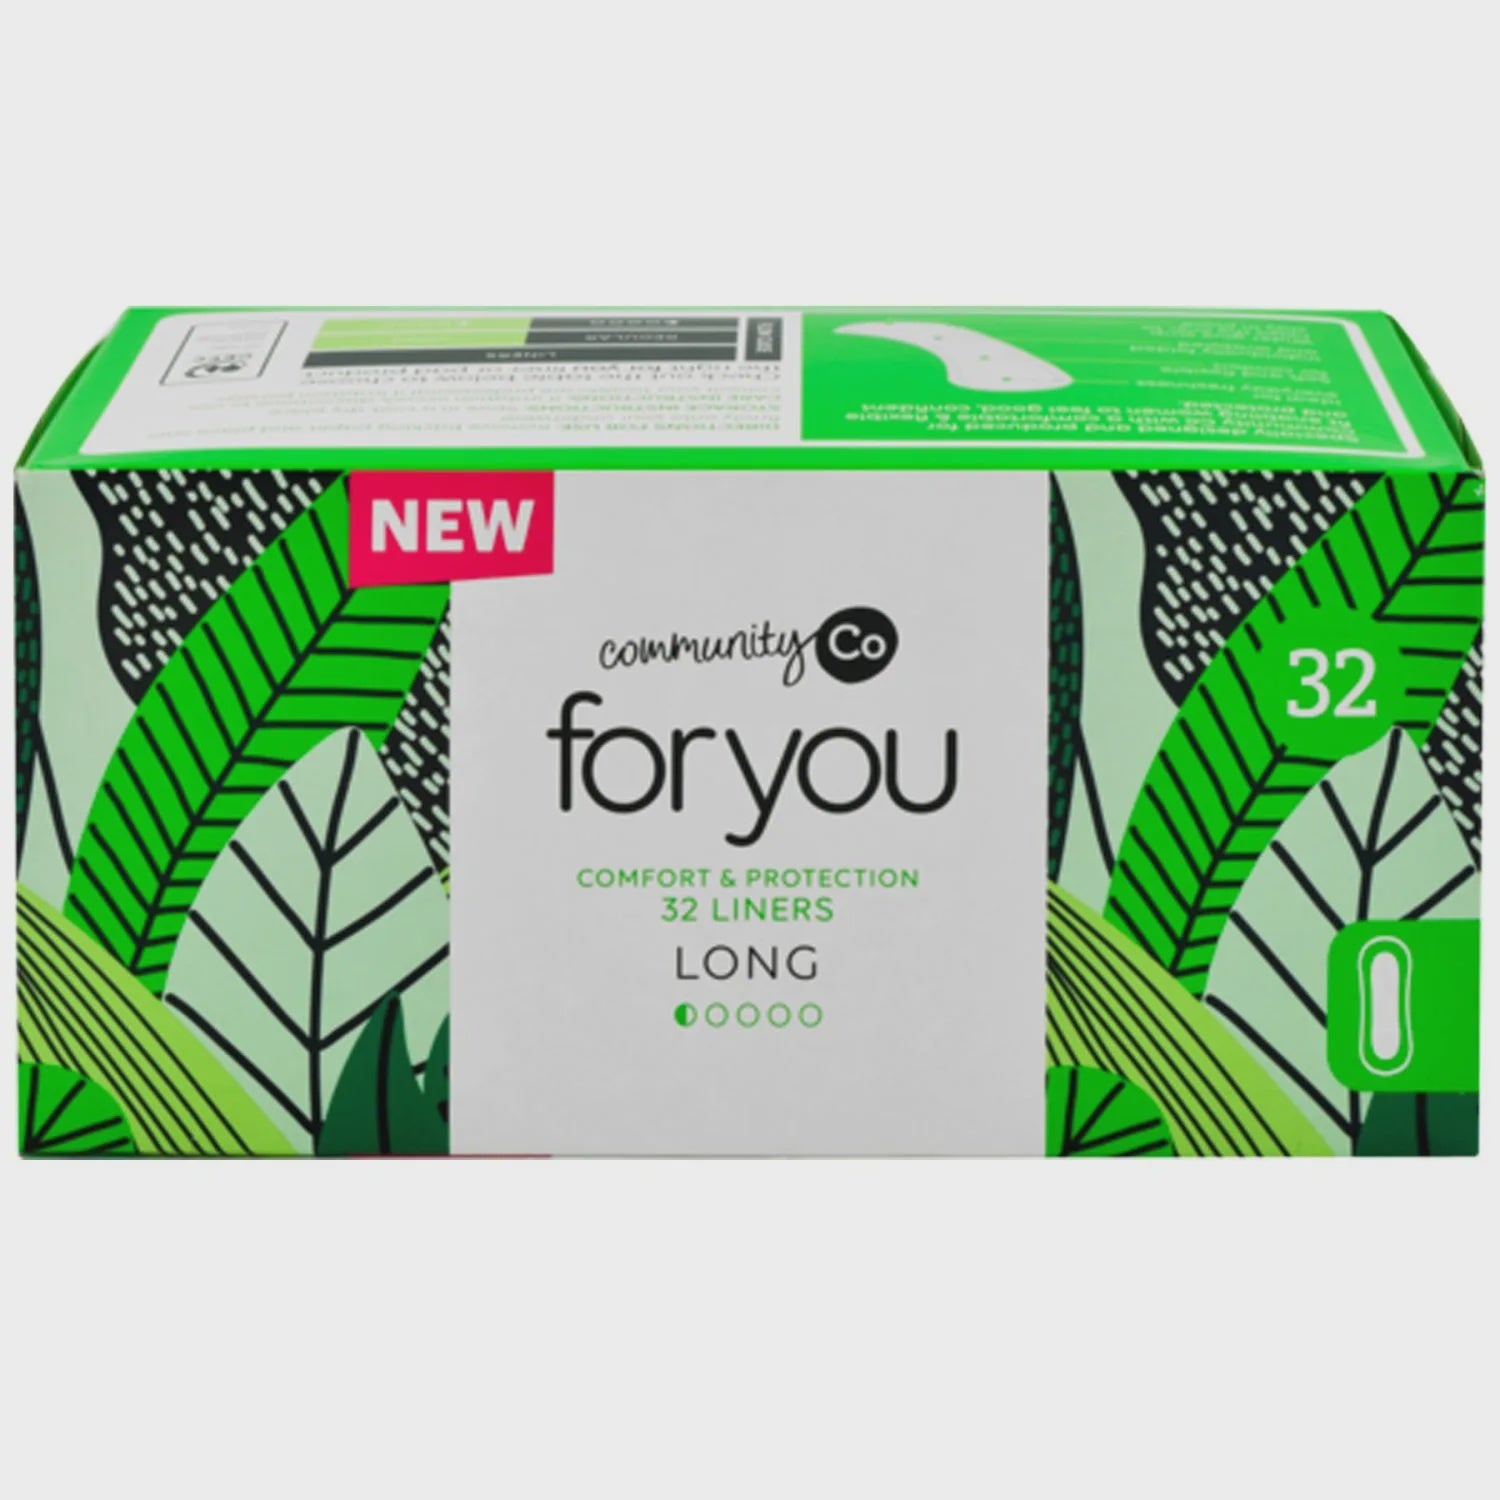 Community Co For You Liners Long 32pk